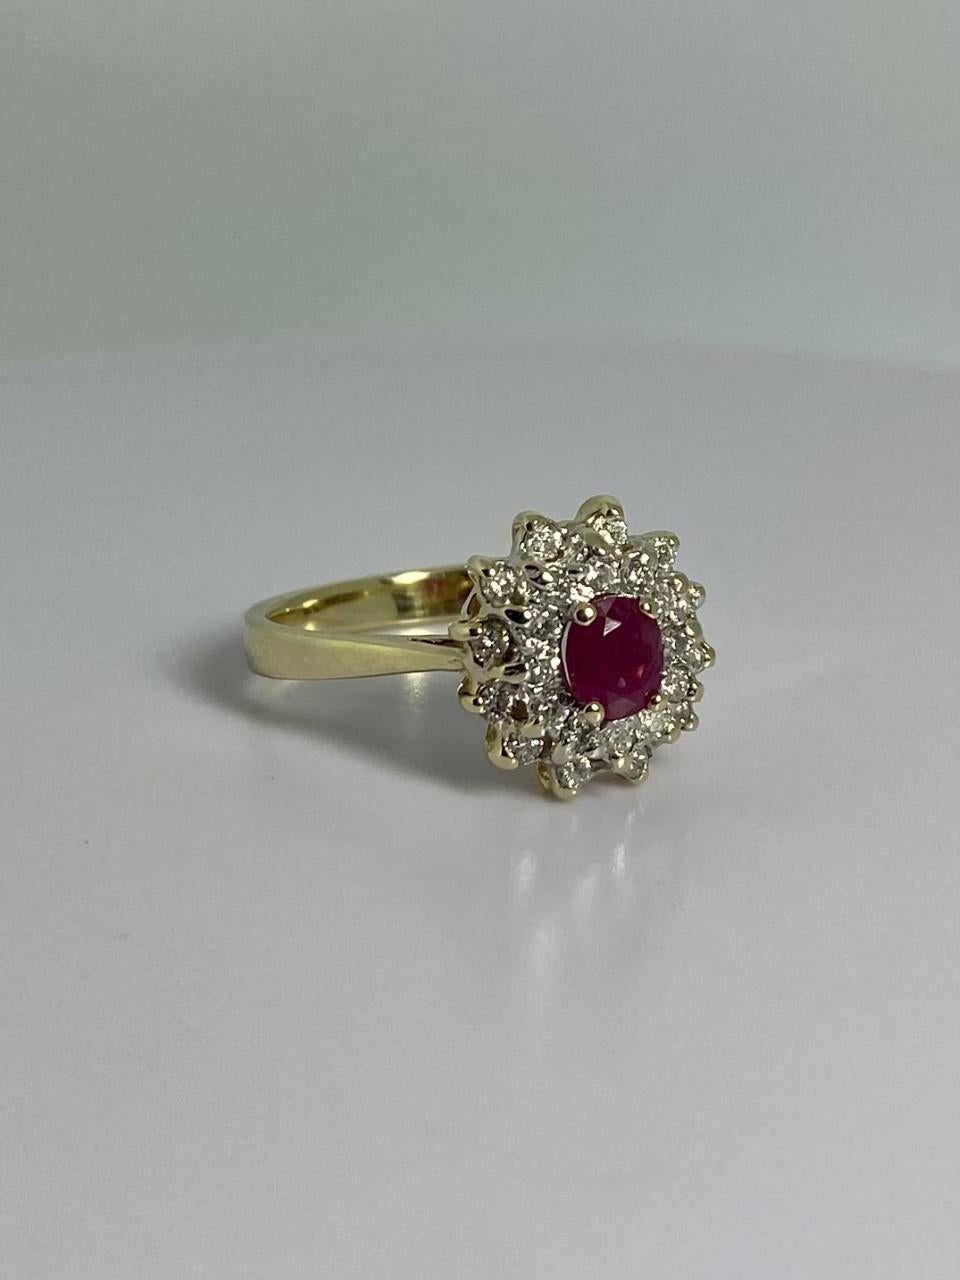 European Entourage ring of 14 carat bicolor gold with natural ruby & 24 diamonds For Sale 4